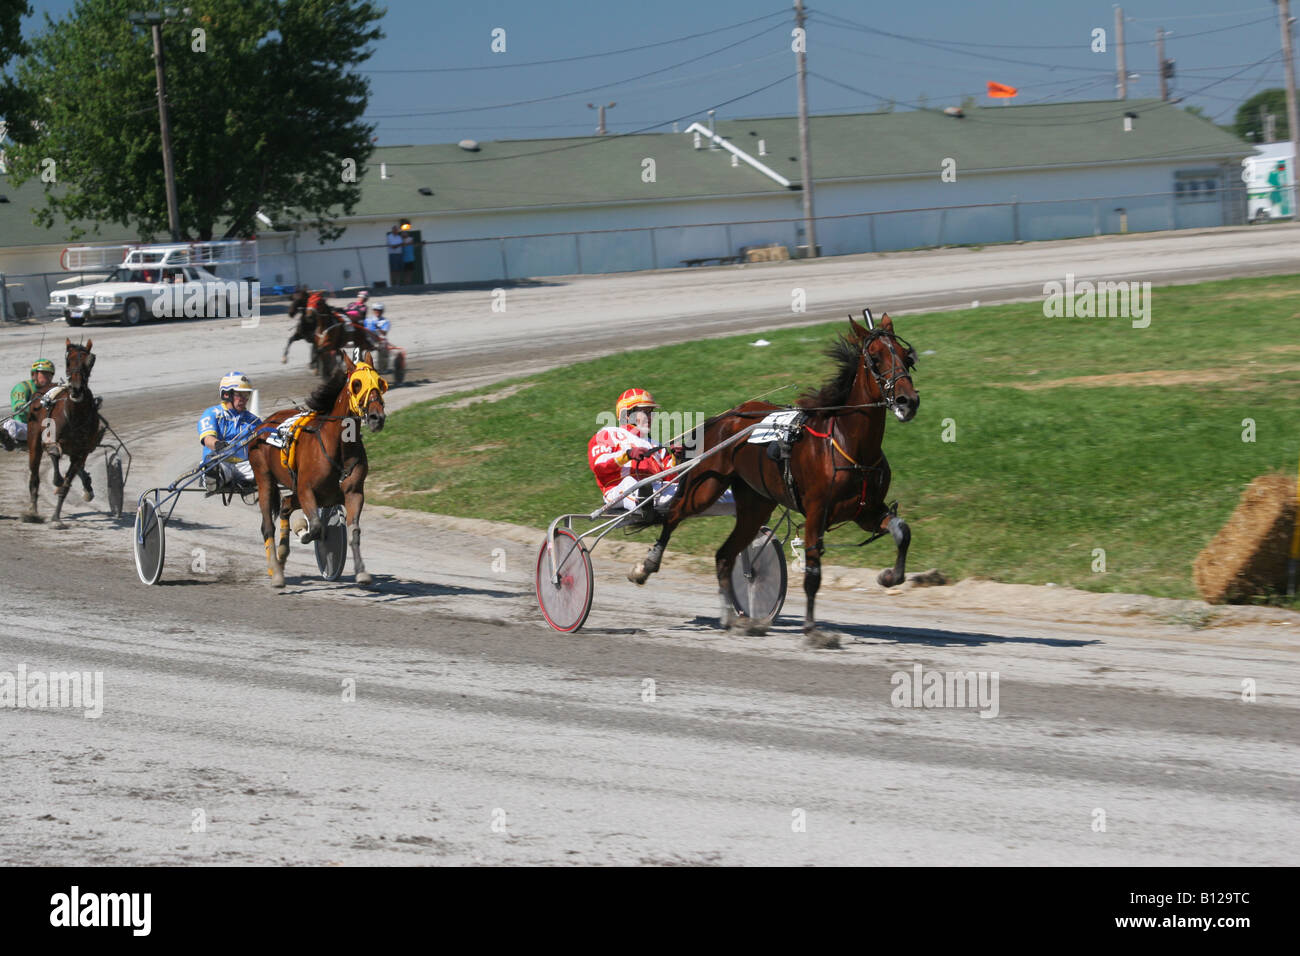 Cablaggio Racing Horse Racing Canfield Fair Canfield Ohio Mahoning County Fair Foto Stock